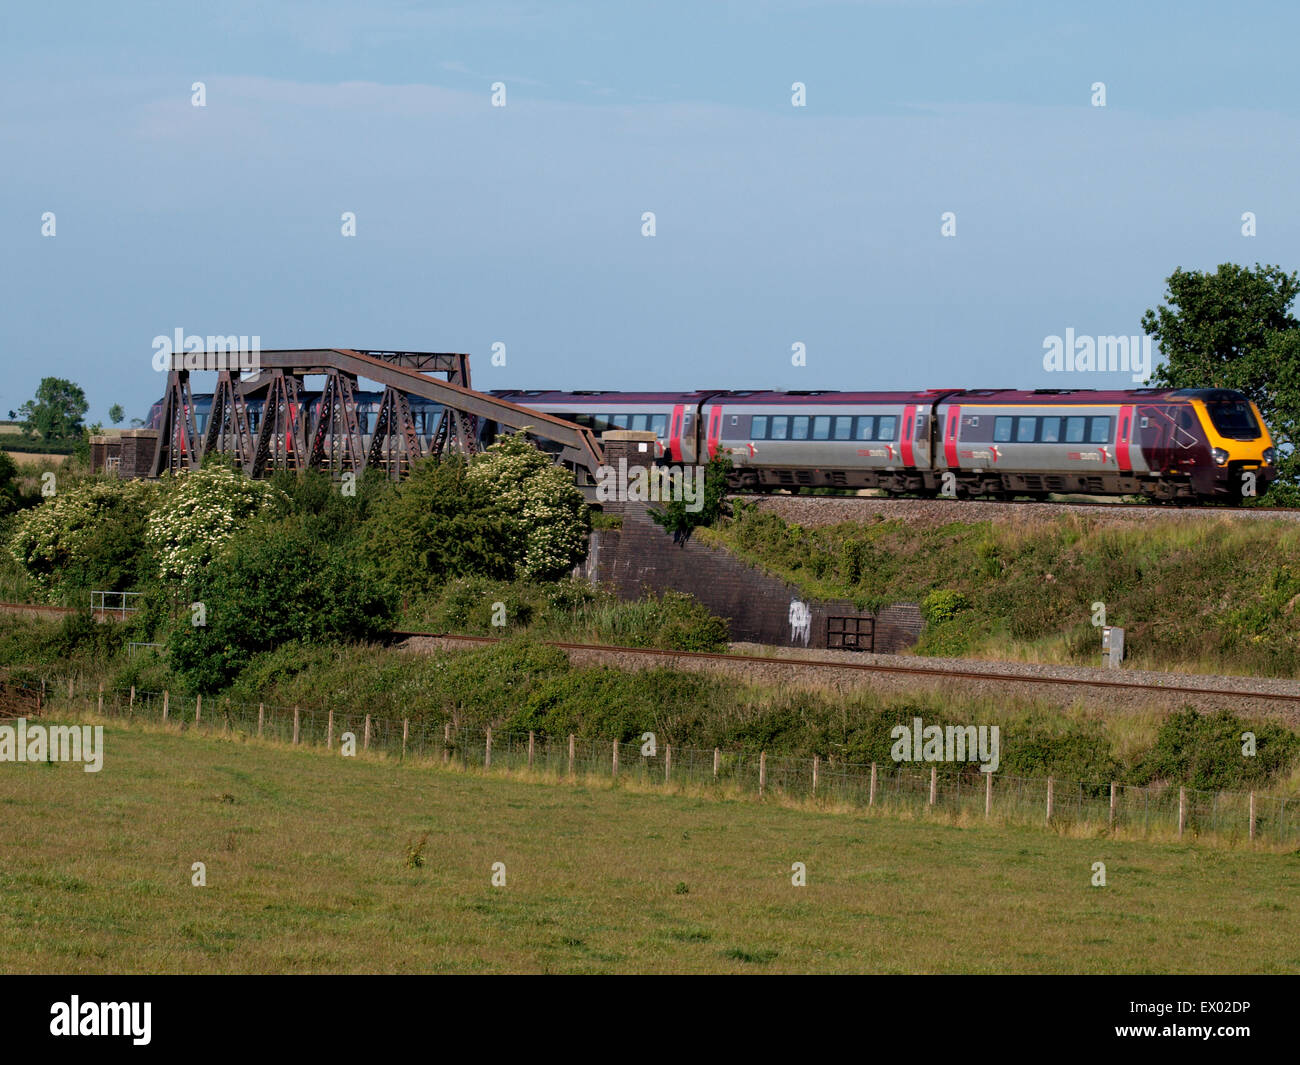 Arriva UK Trains, Cross Country train coming over a truss railway bridge on the Somerset Levels, UK Stock Photo